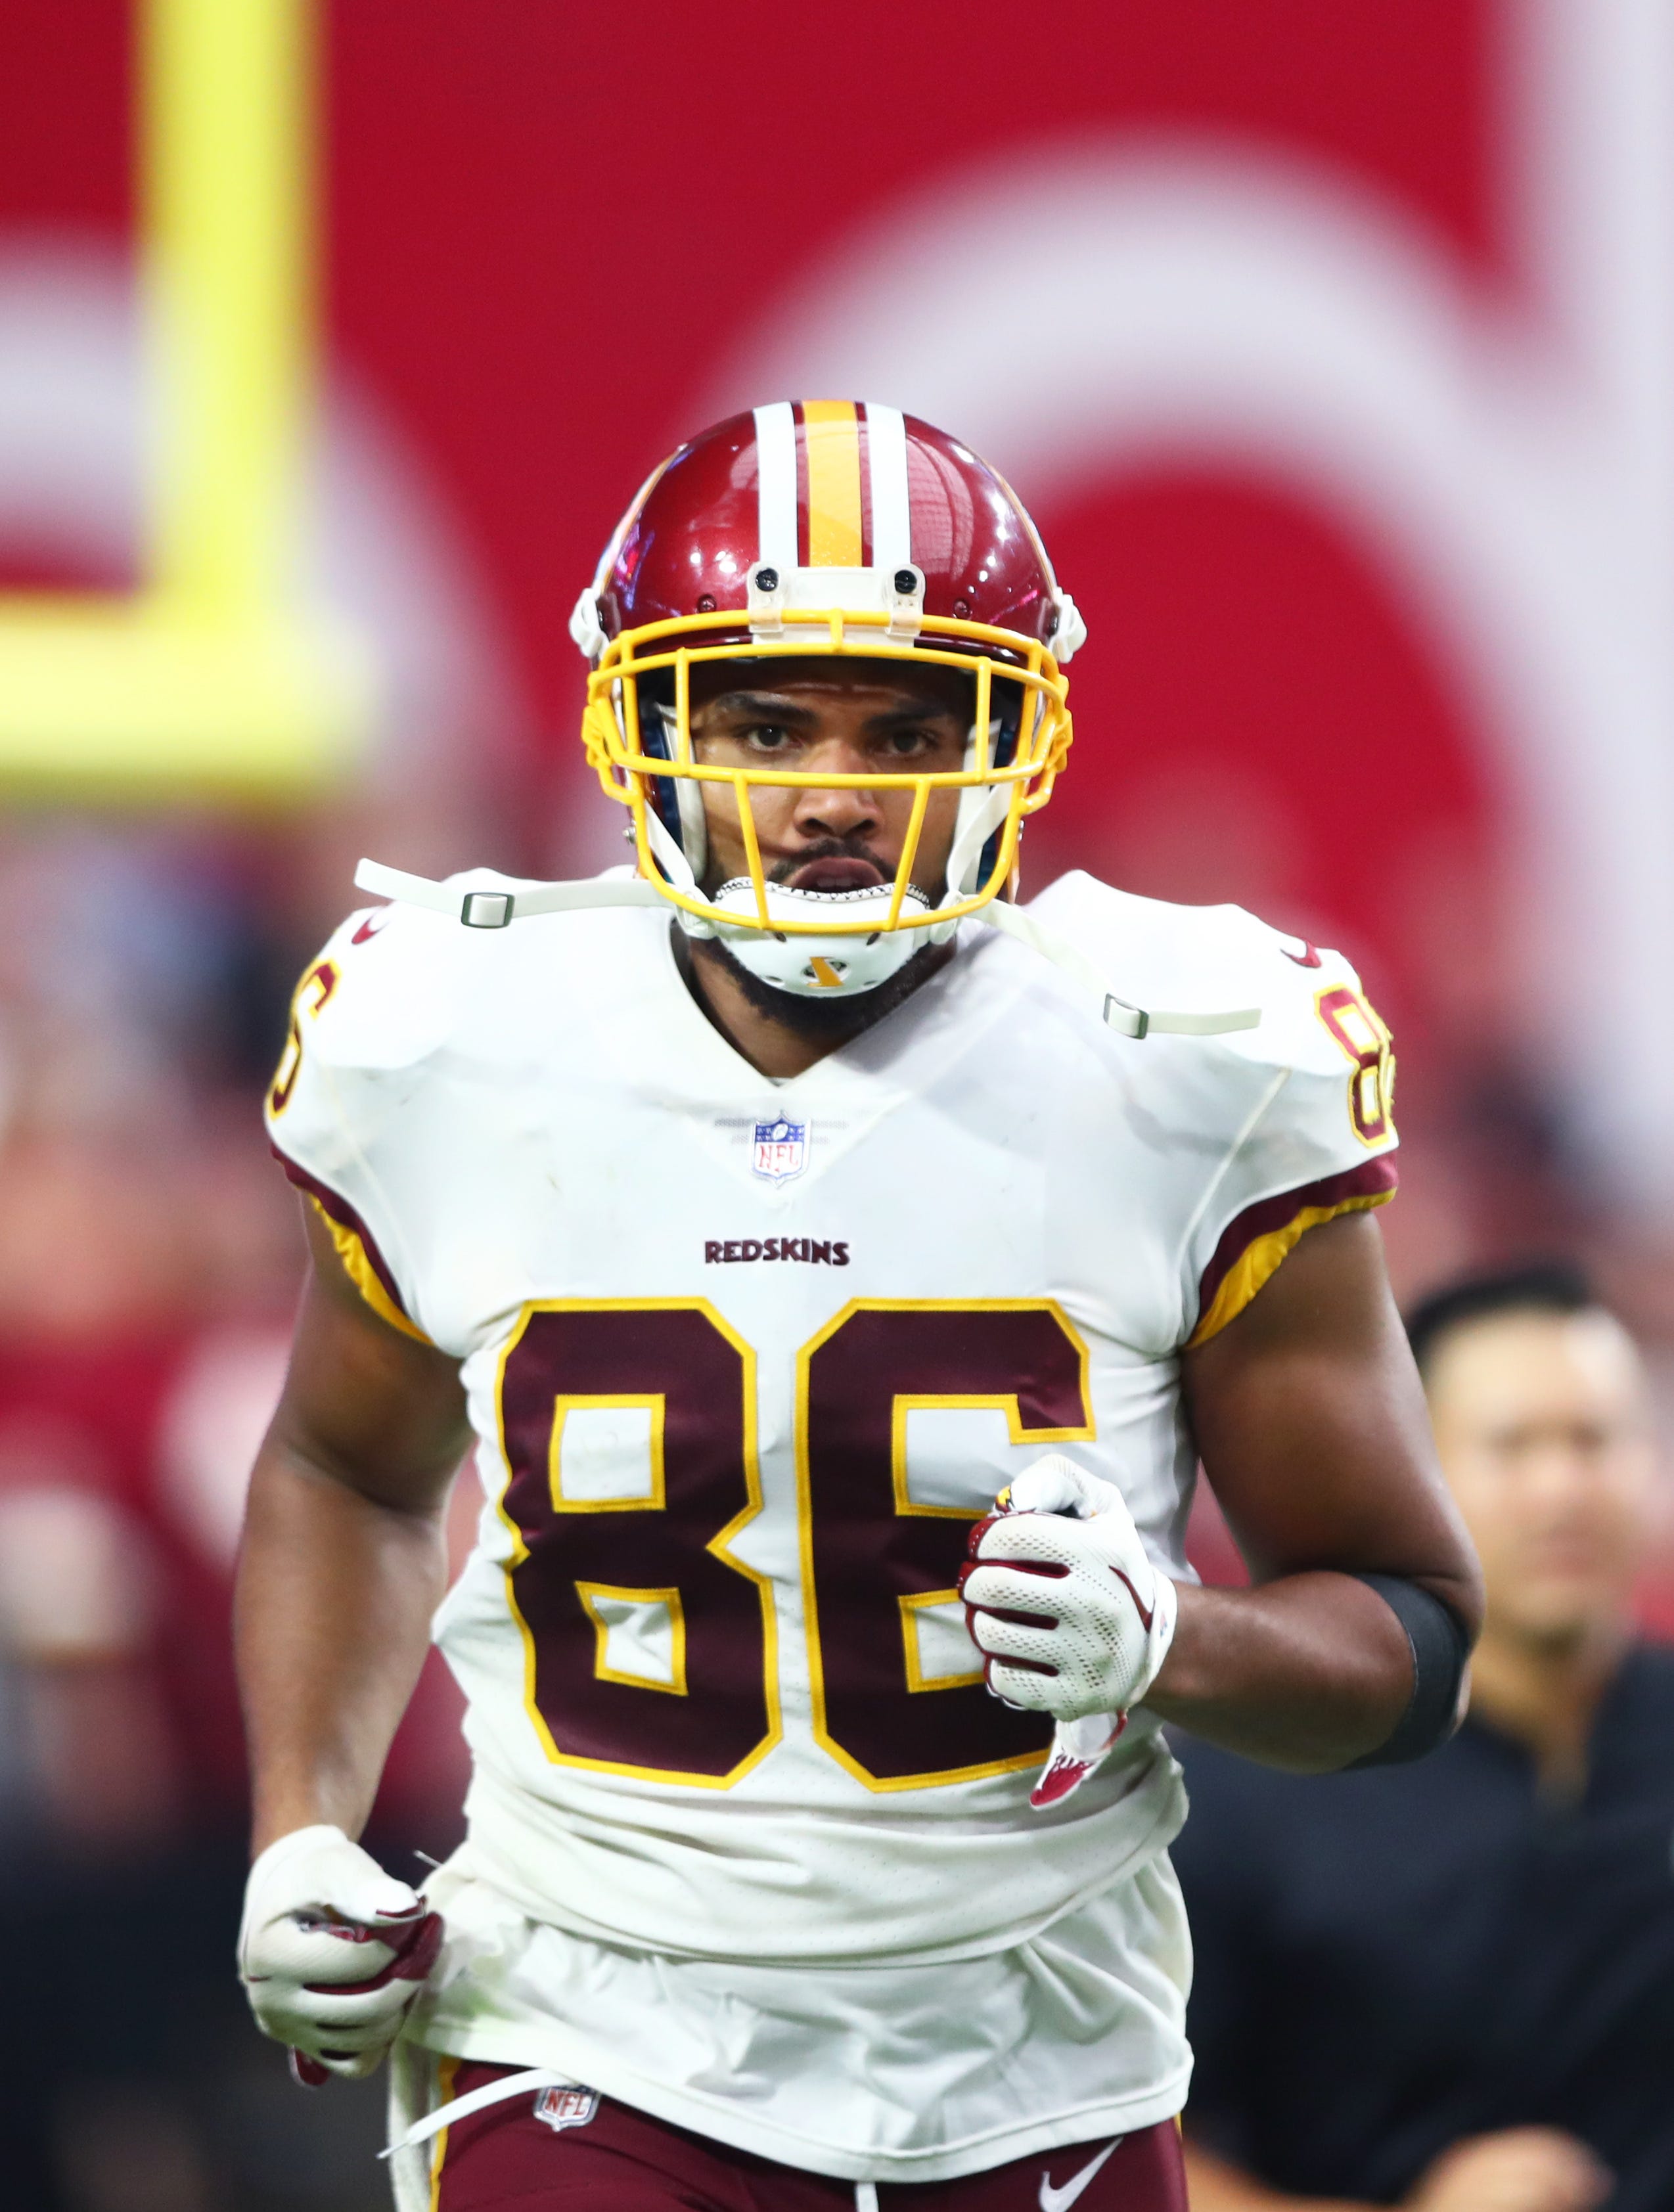 Jordan Reed, former Pro Bowl tight end, retiring from NFL due to concussion-related issues